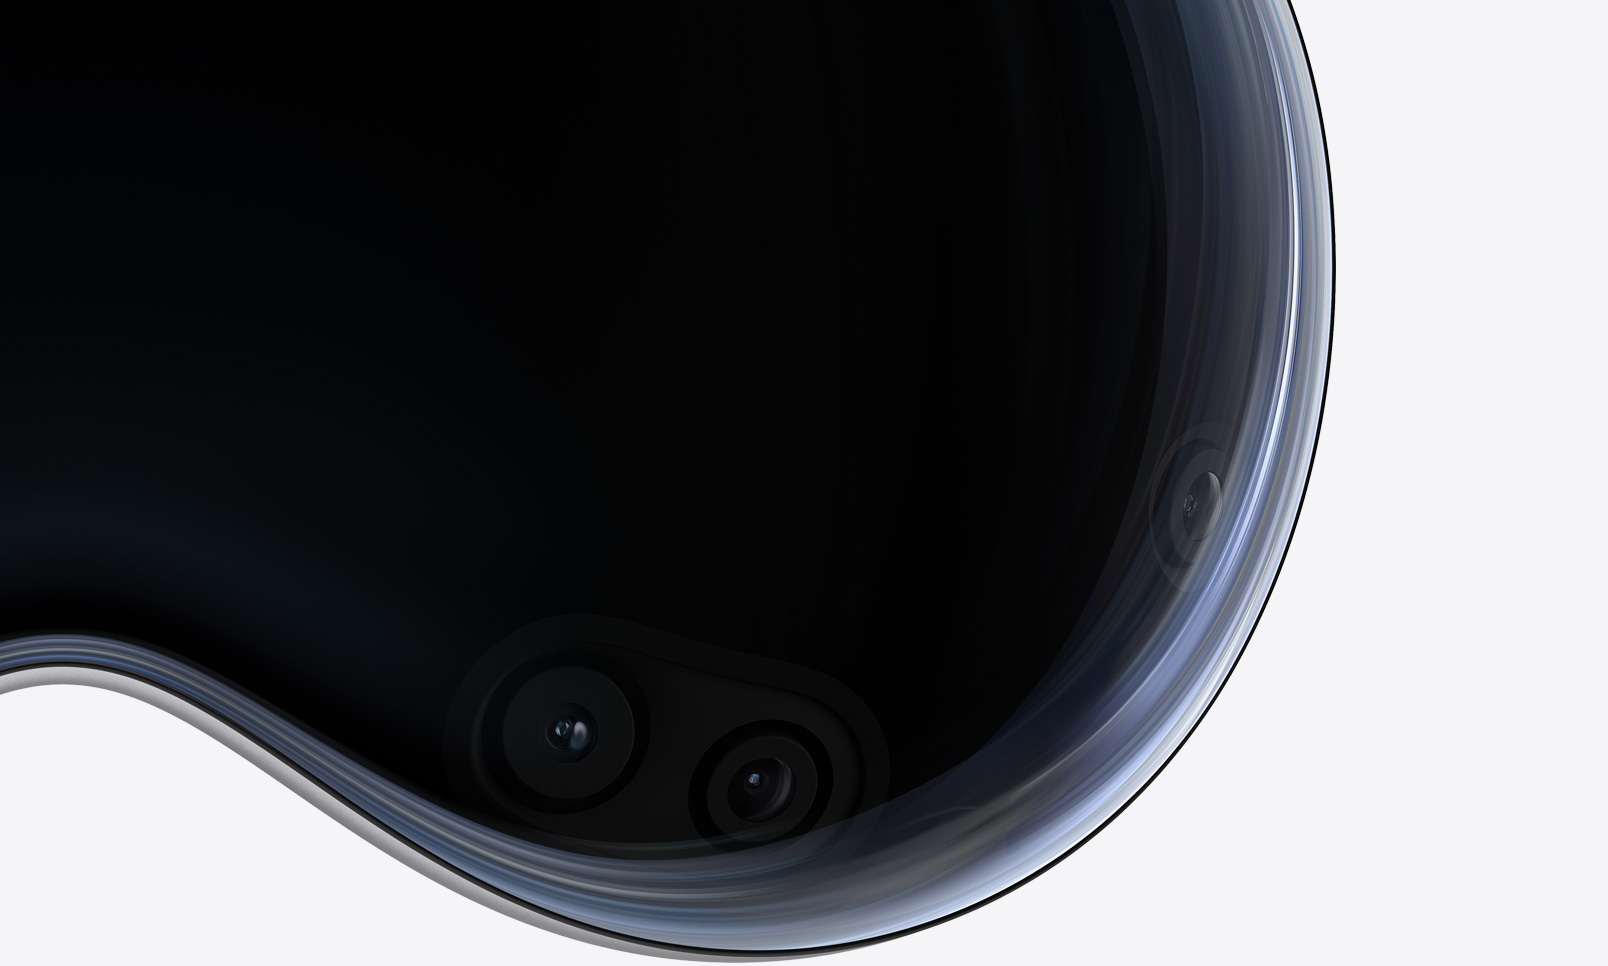 Close-up front view of Apple Vision Pro showing cameras and sensors behind the curved glass